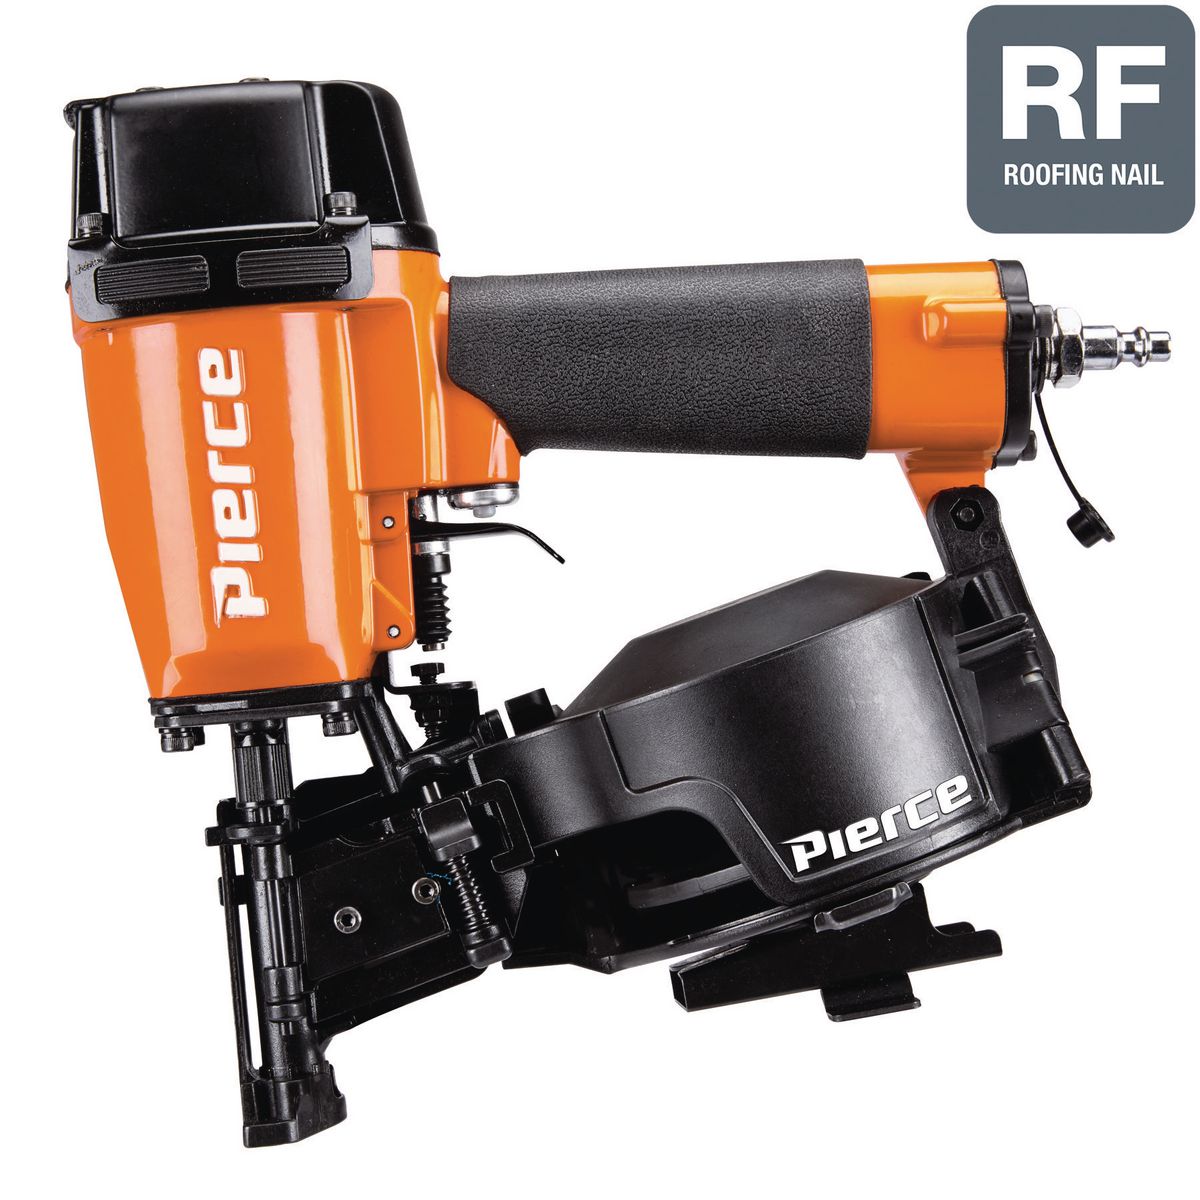 PIERCE 15° Coil Roofing Nailer - Item 64254